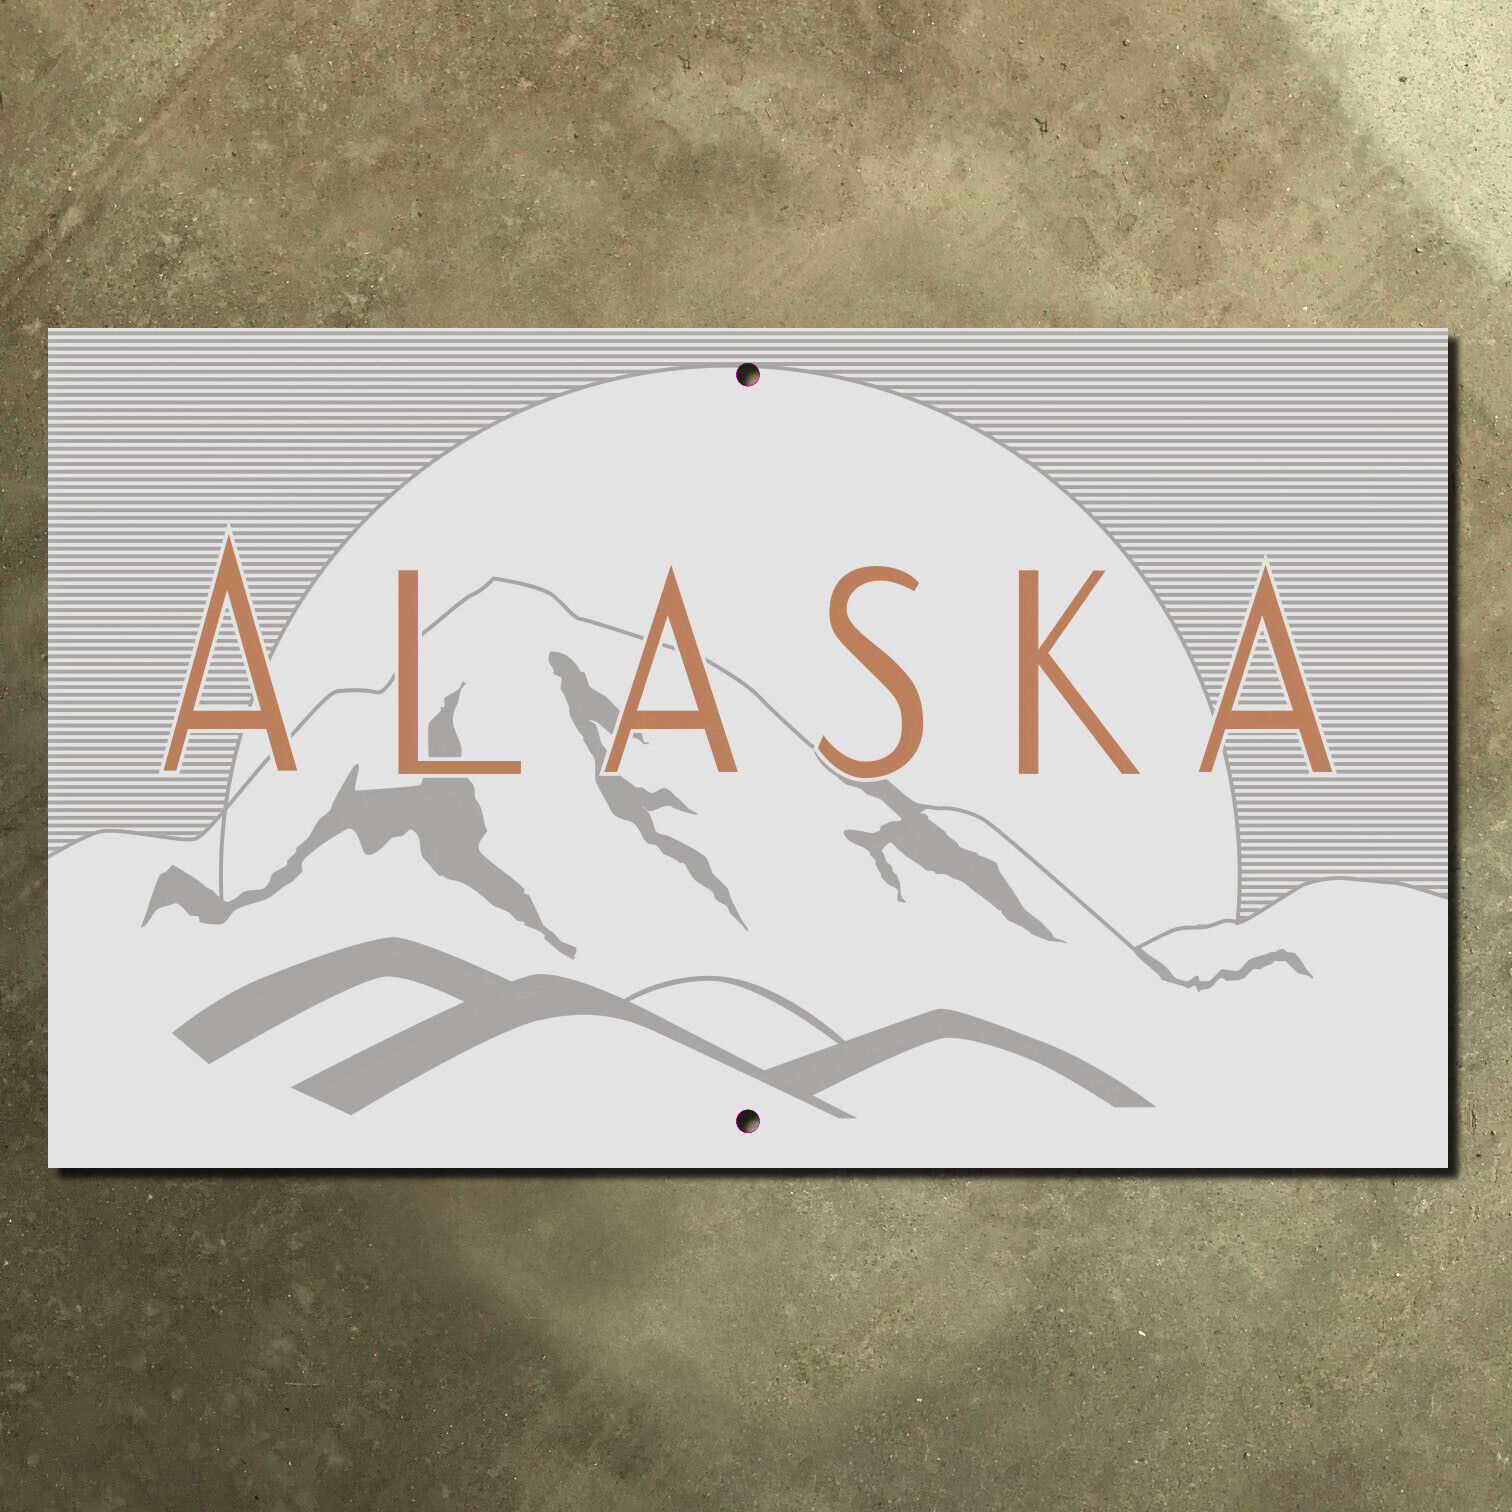 Alaska state line welcome scenery mountains highway 1960s road sign 23x14